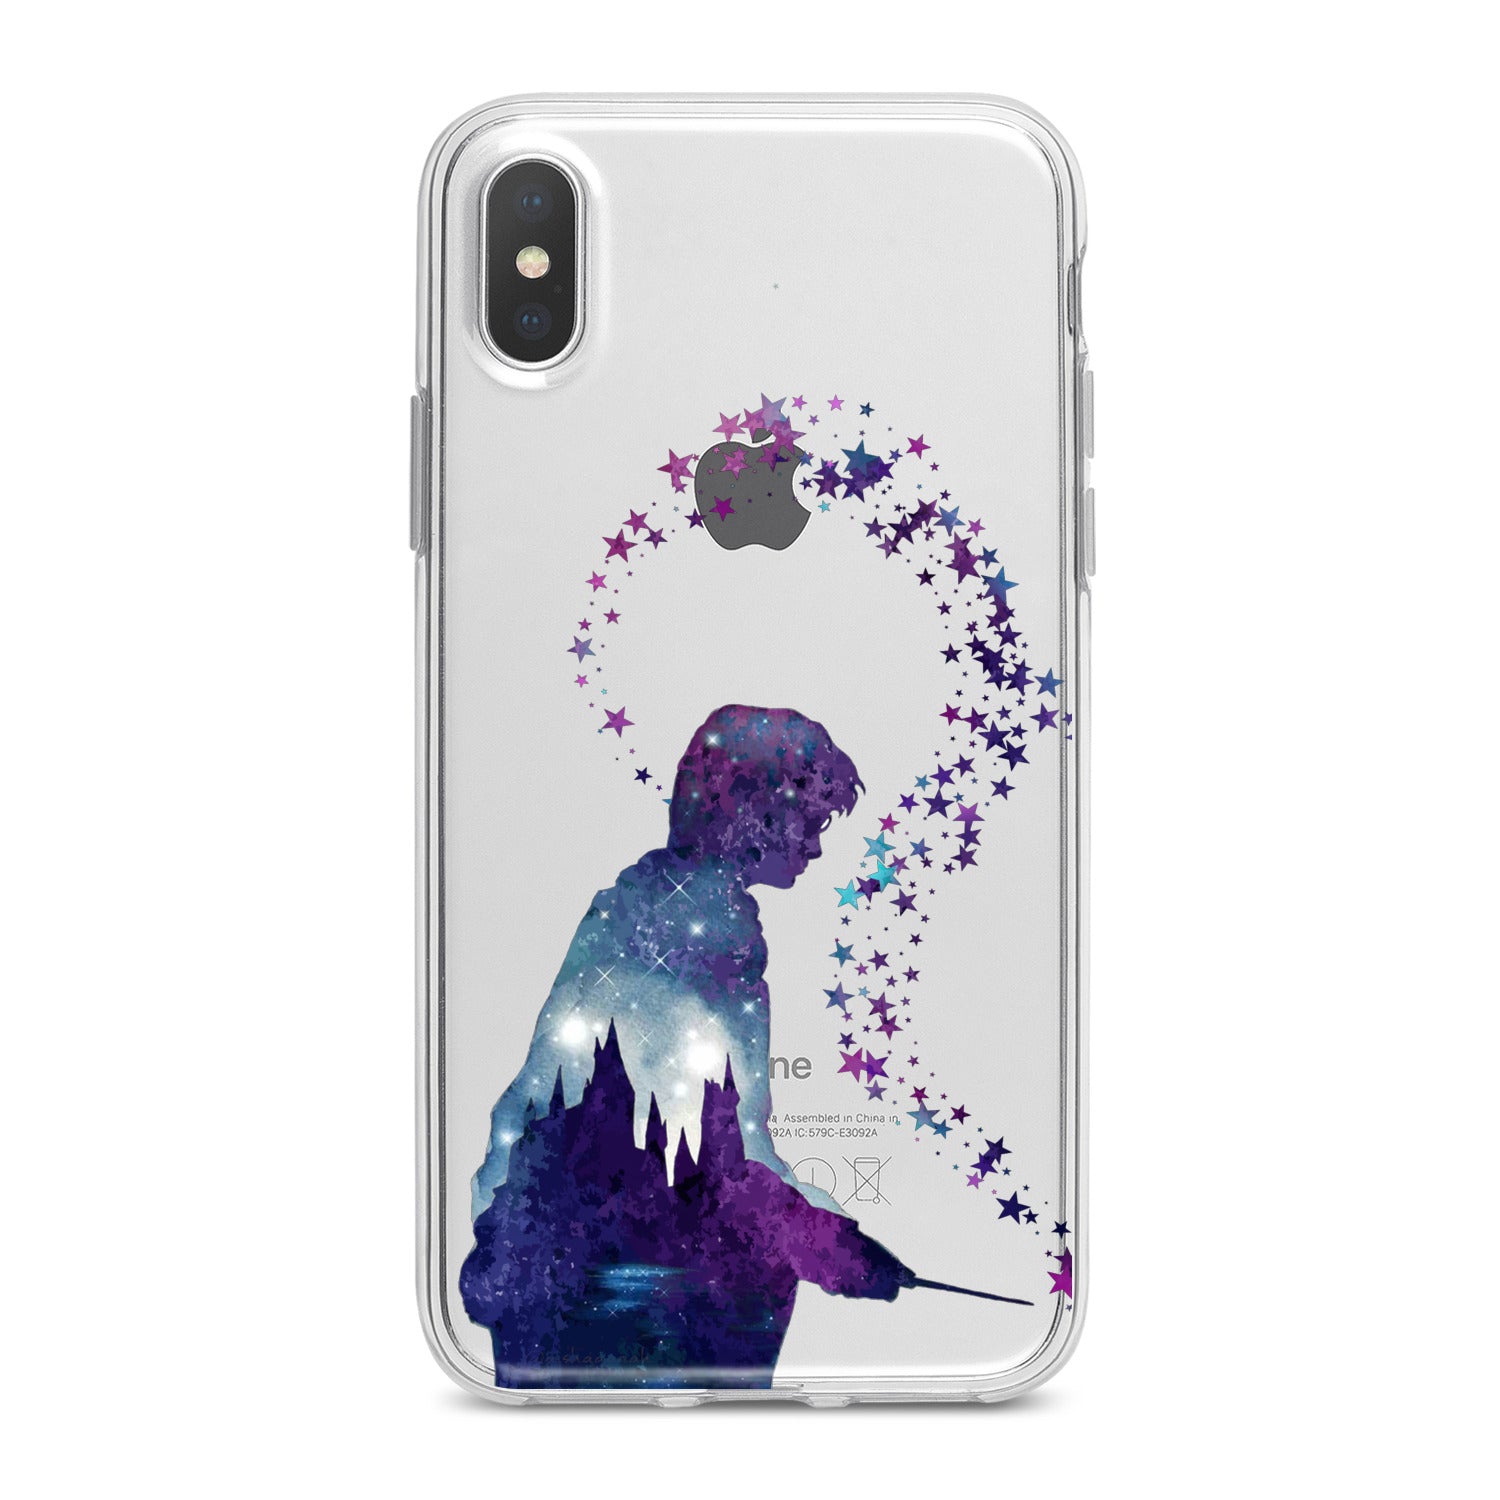 Lex Altern Magic Harry Phone Case for your iPhone & Android phone.